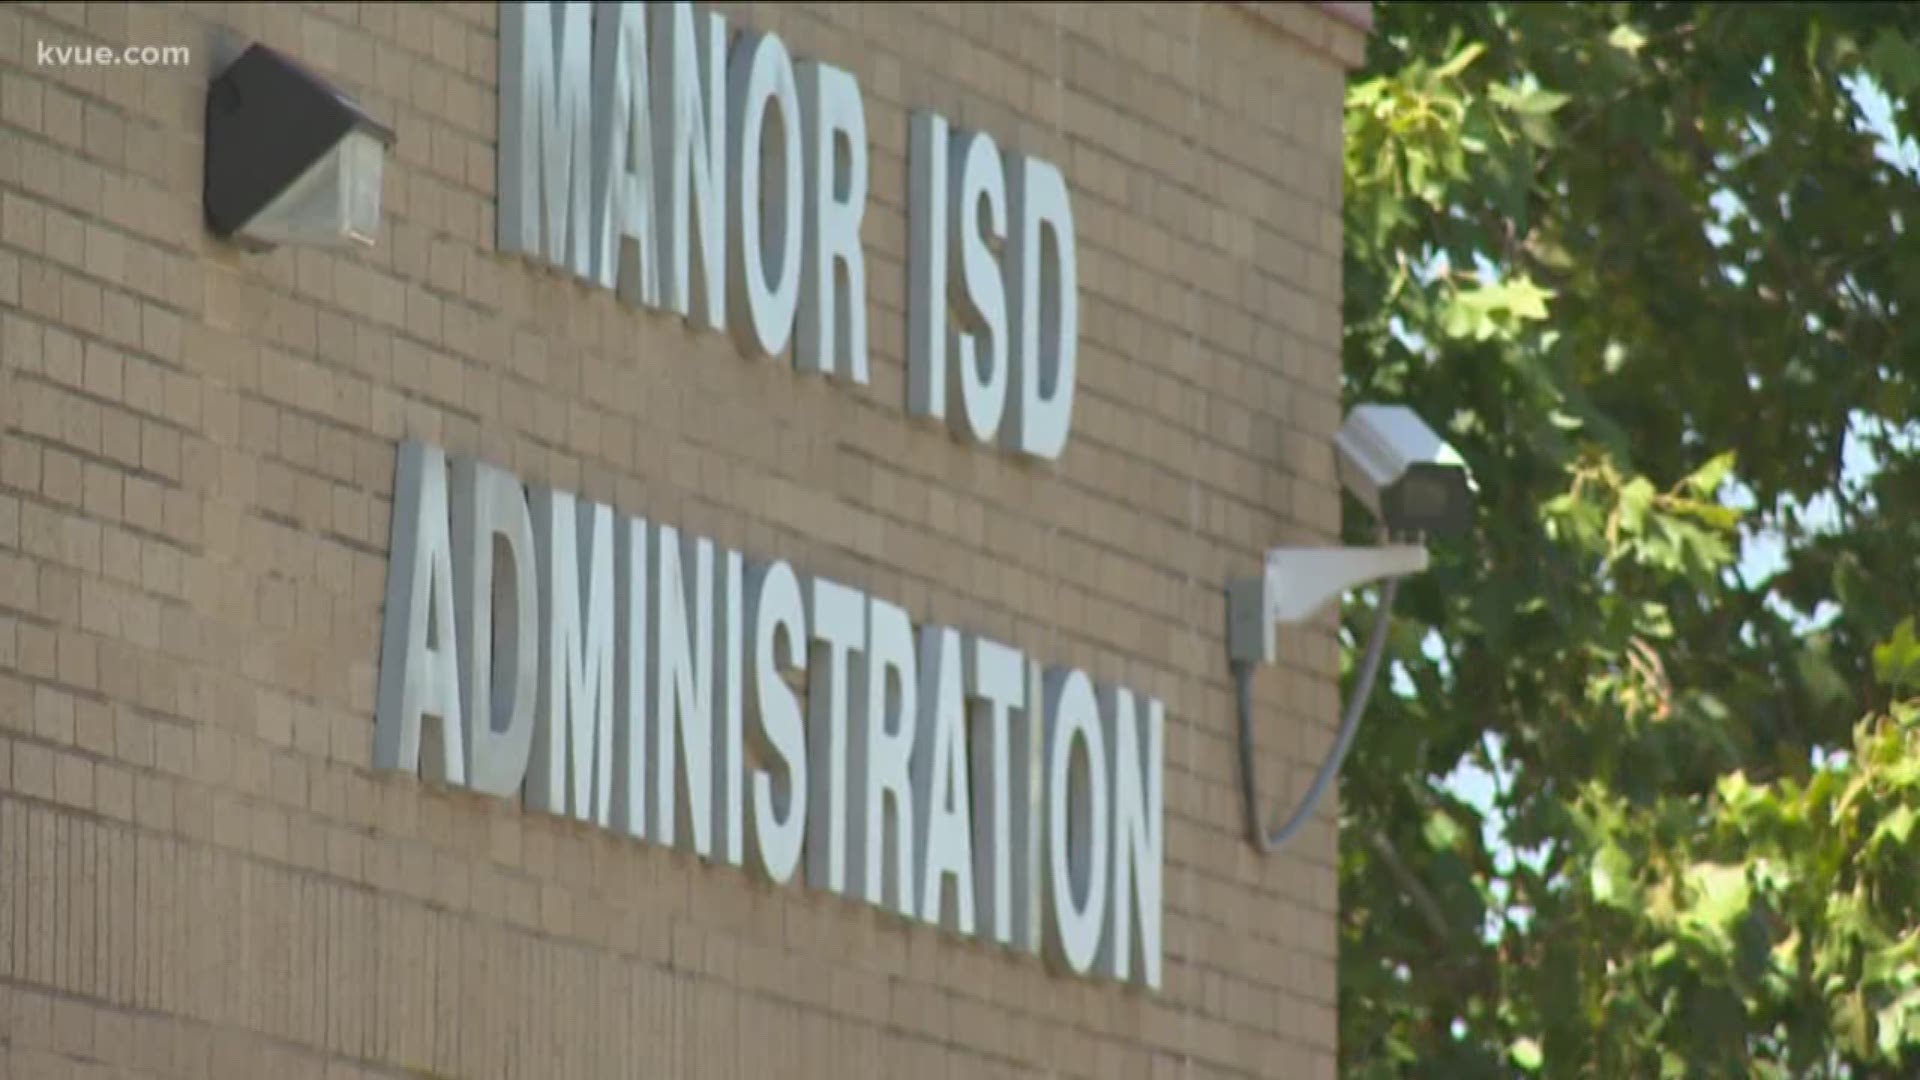 All Manor ISD employees will see a bigger paycheck after the school board approved a $90 million budget.